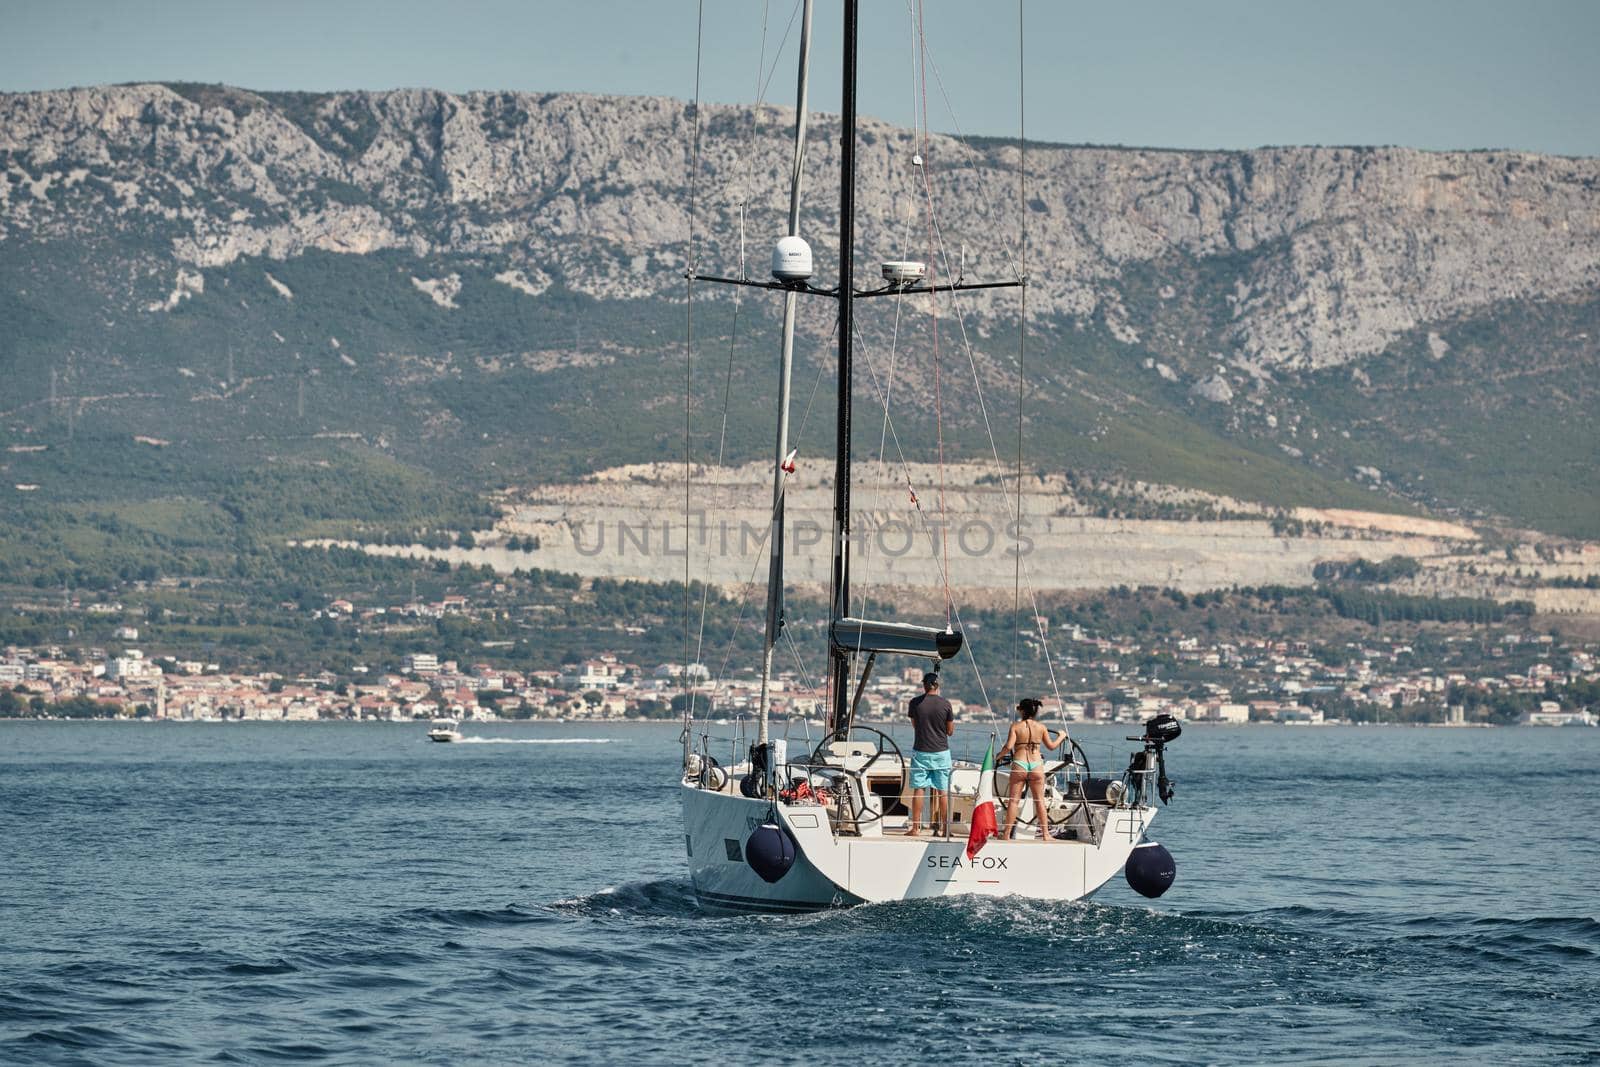 Croatia, Adriatic Sea, 15 September 2019: People have a good time on the sailboat, bright colors, island with windmills are on background by vladimirdrozdin